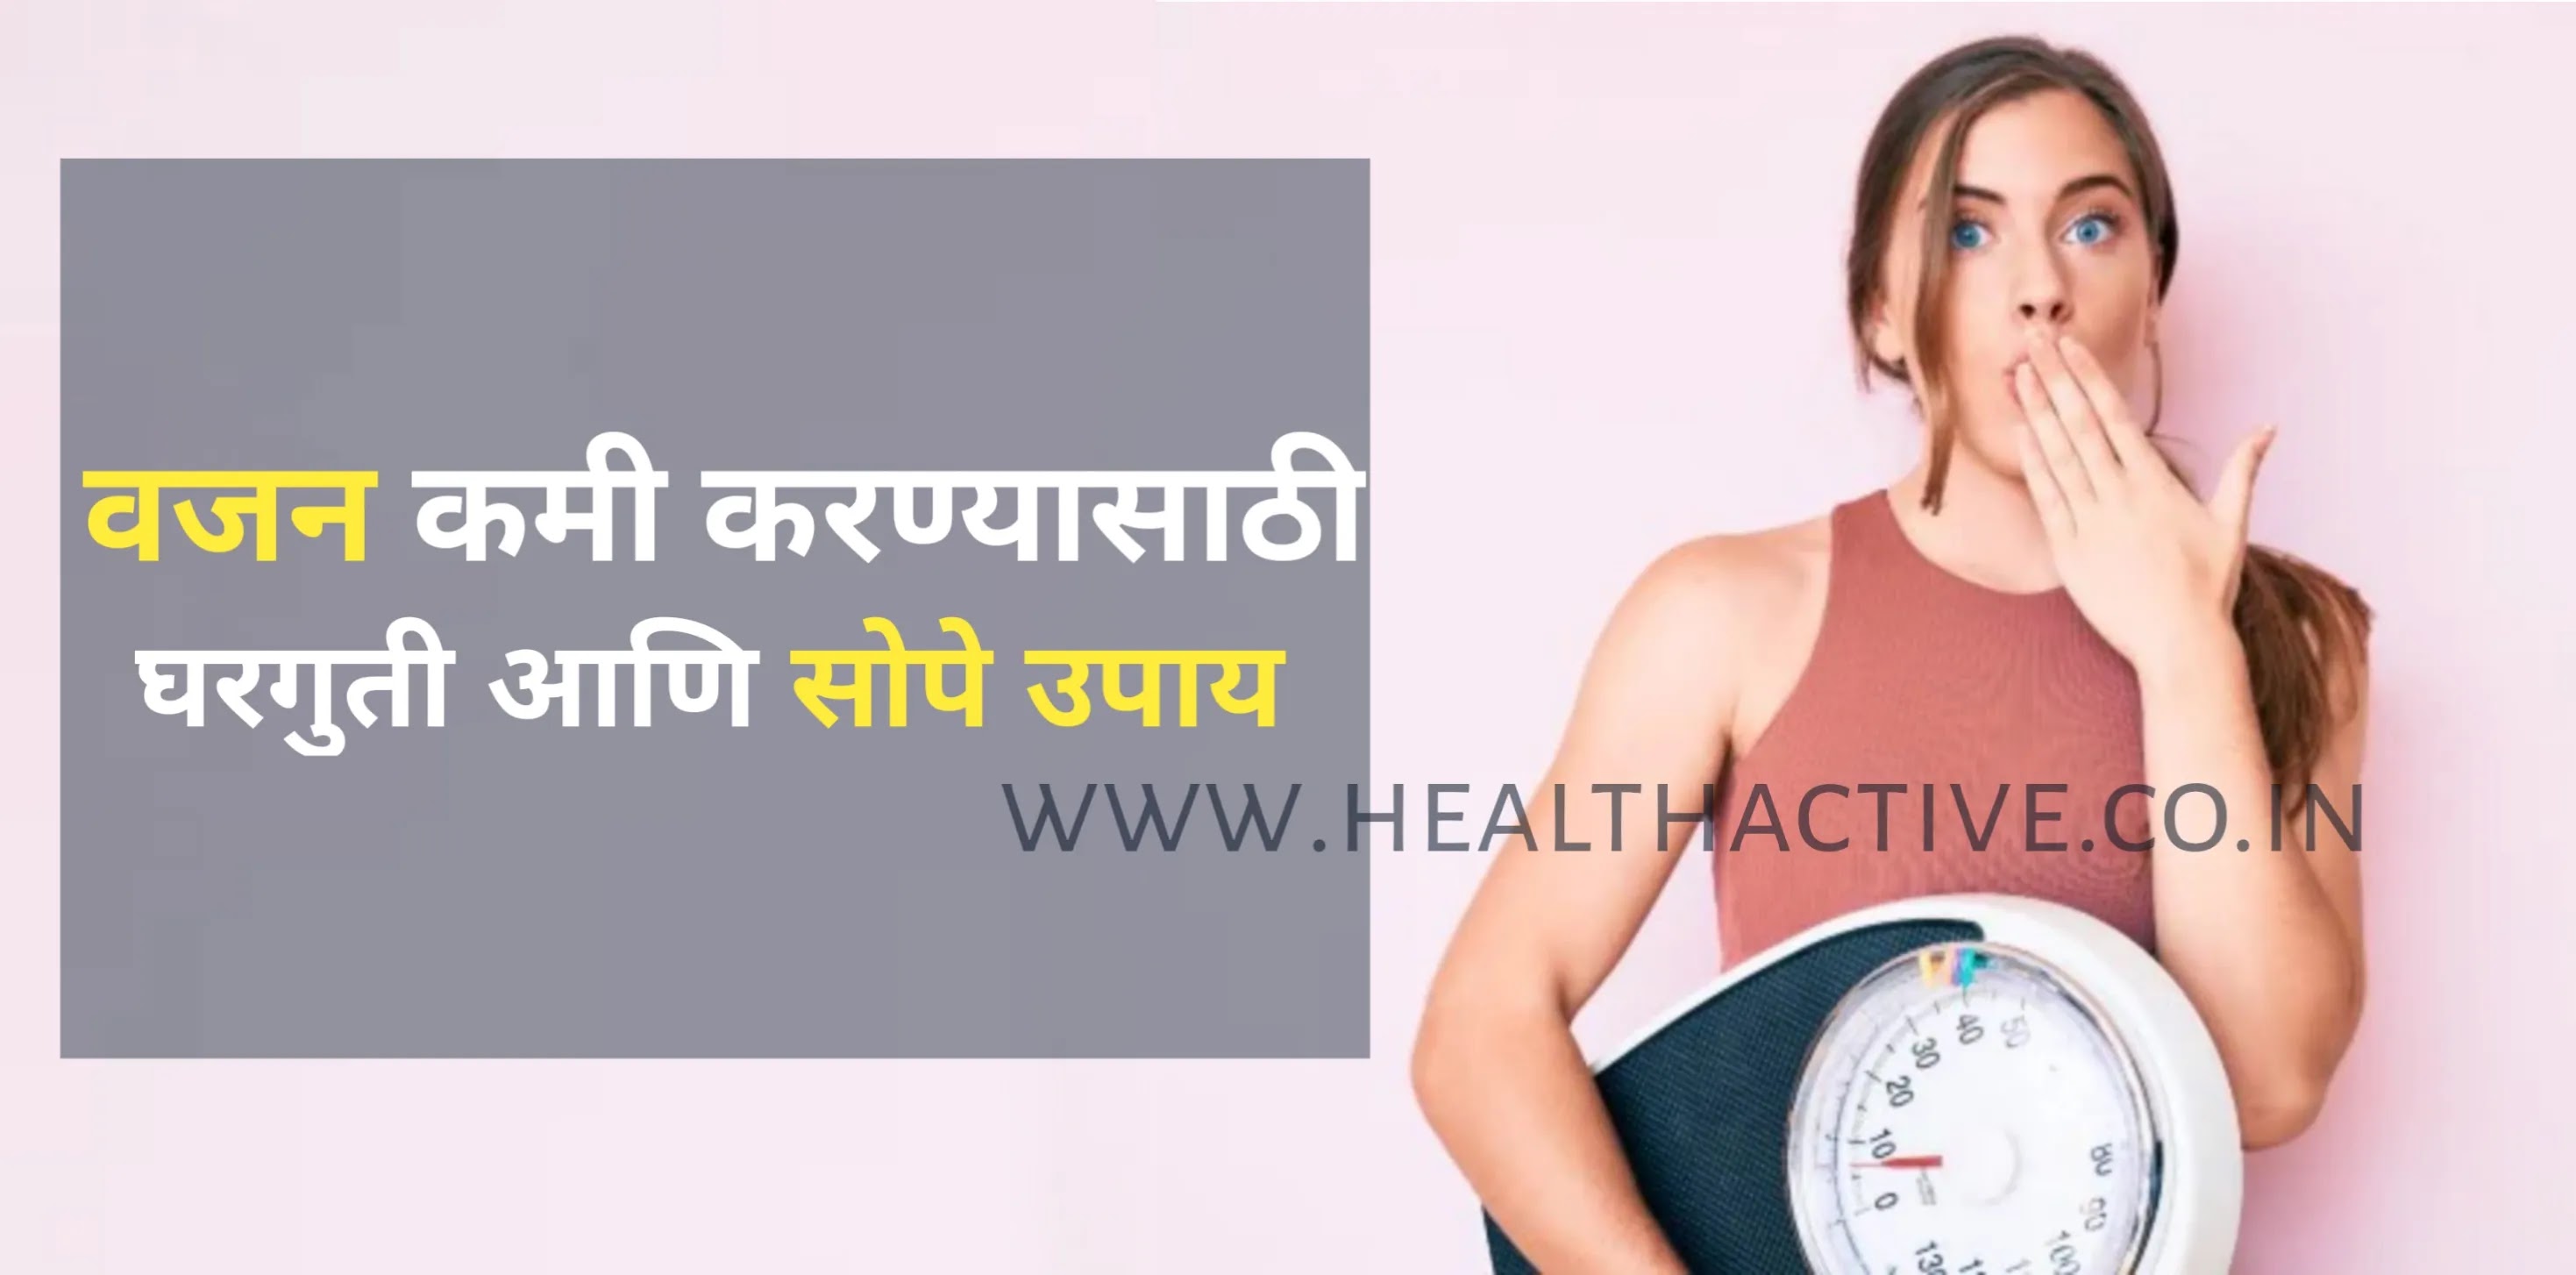 Weight Loss Tips in Marathi at Home